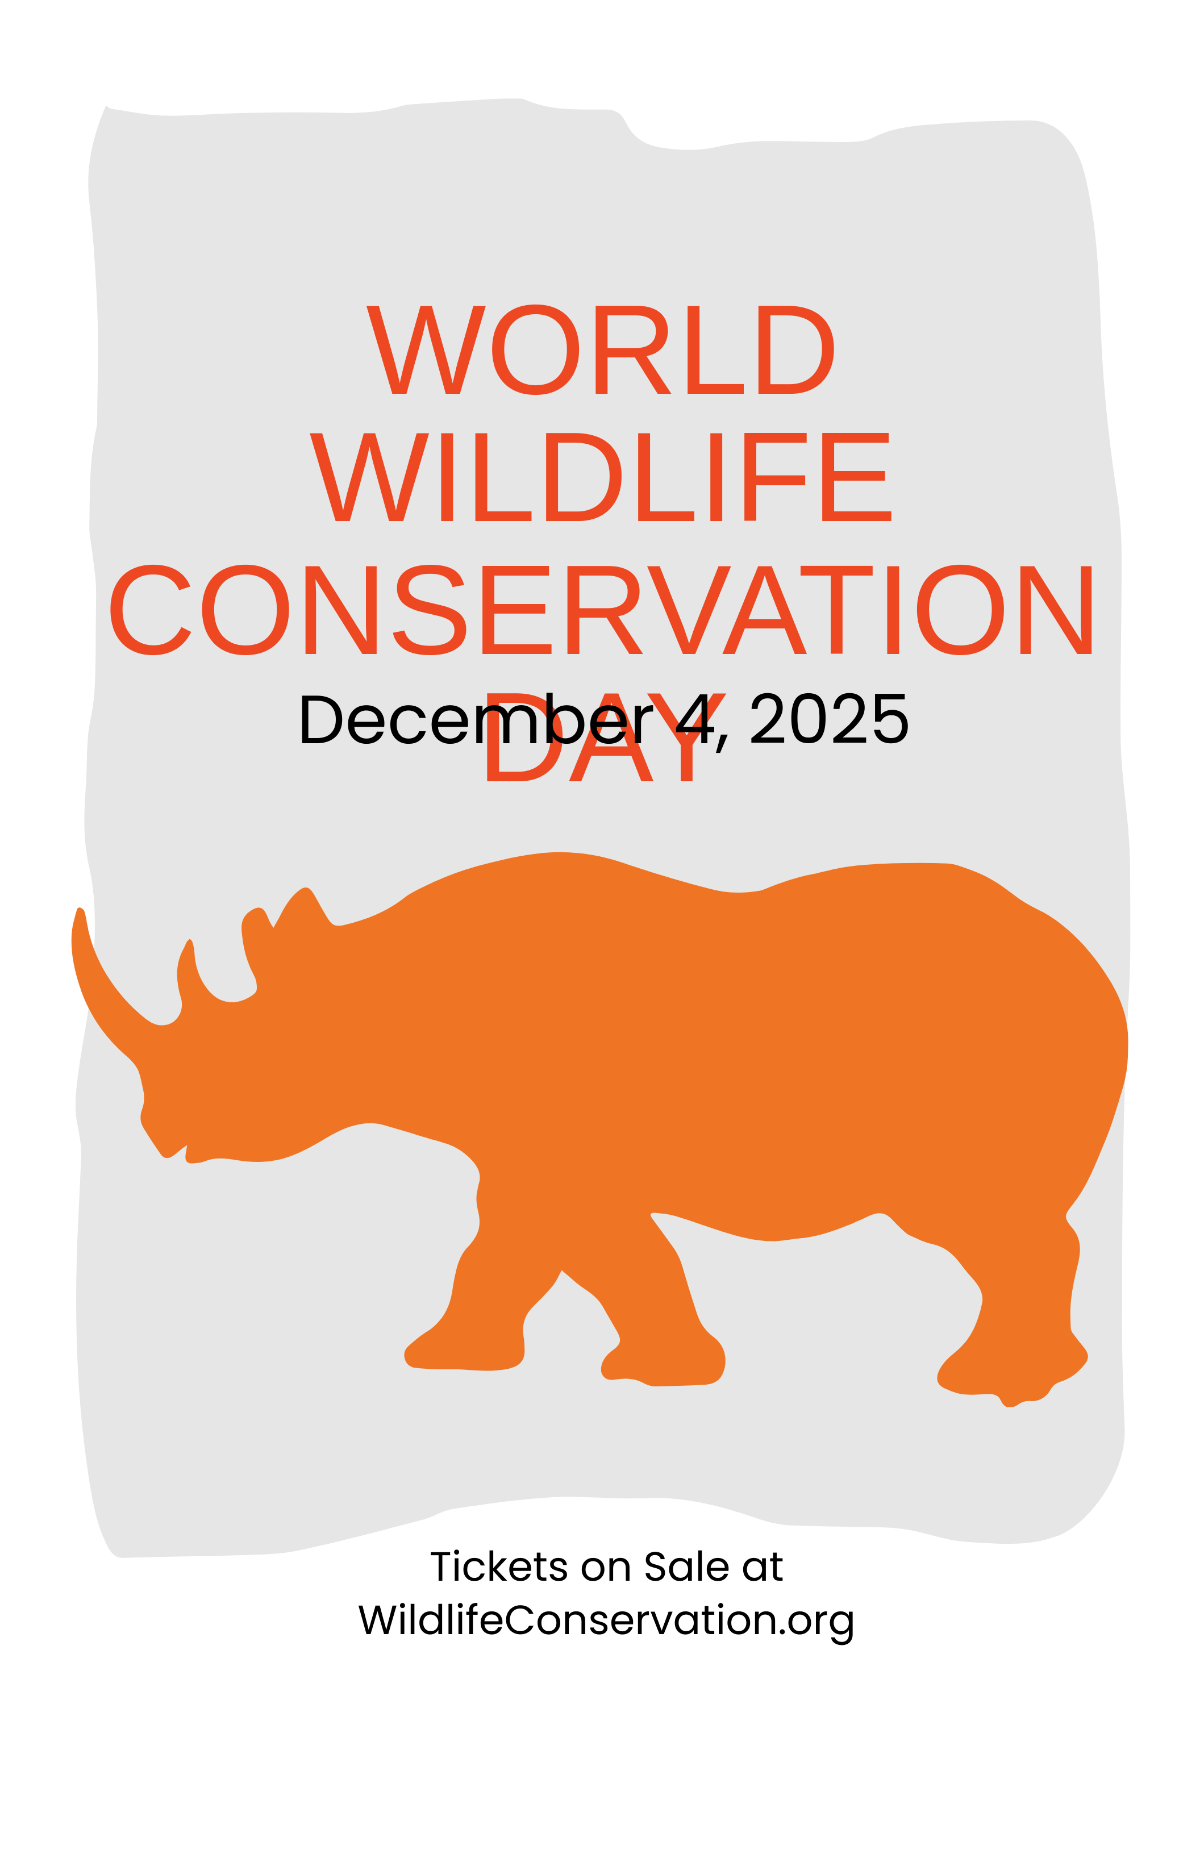 World Wildlife Conservation Day Poster Template